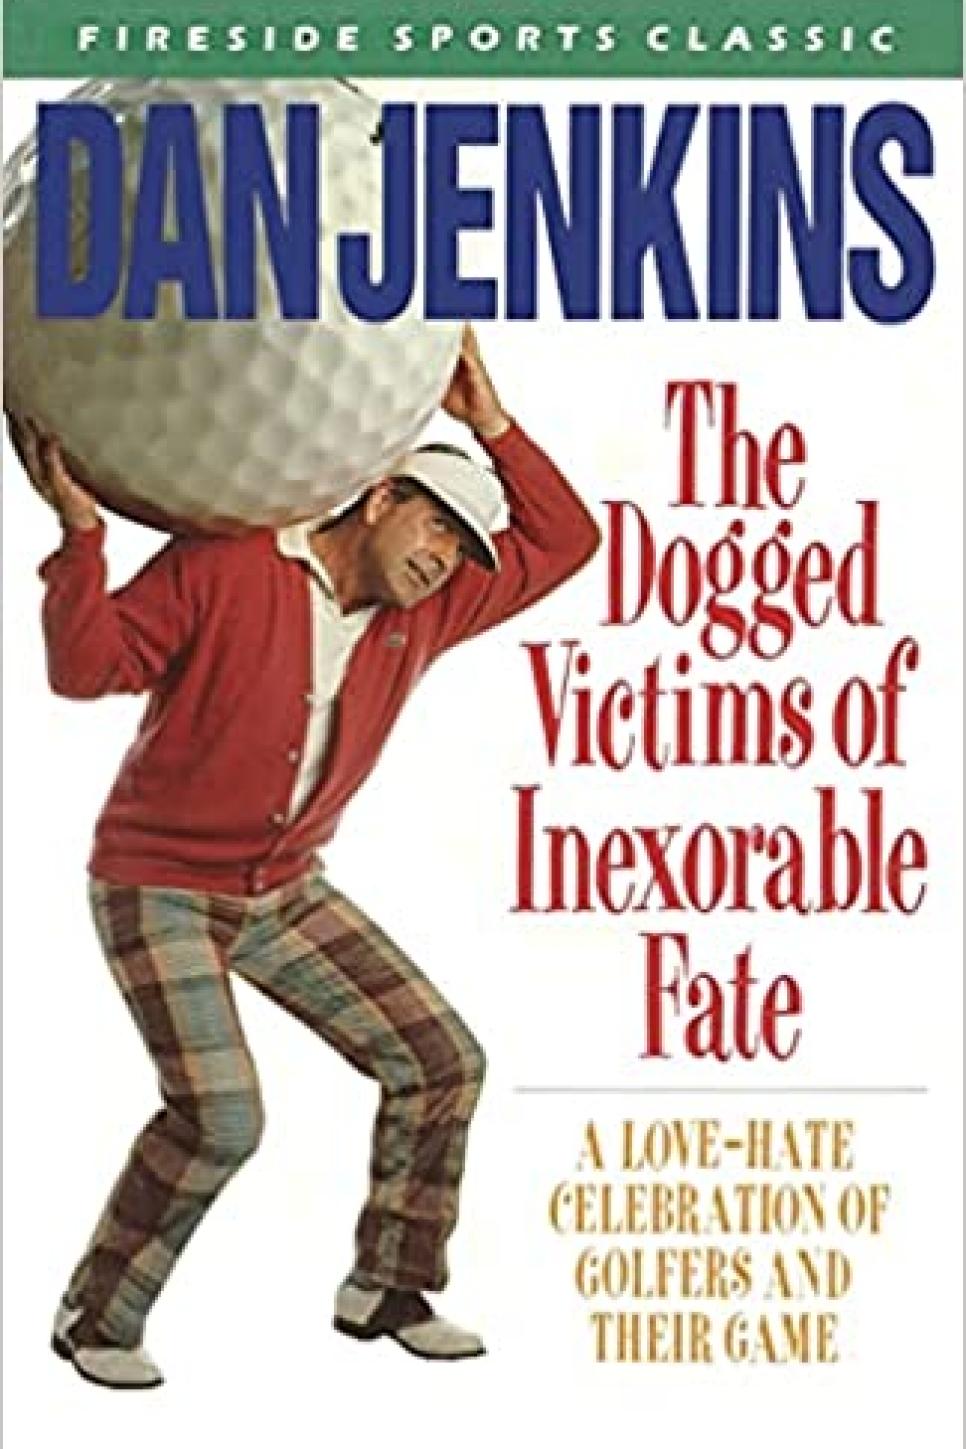 rx-amazonthe-dogged-victims-of-inexorable-fate-by-dan-jenkins-1970.jpeg